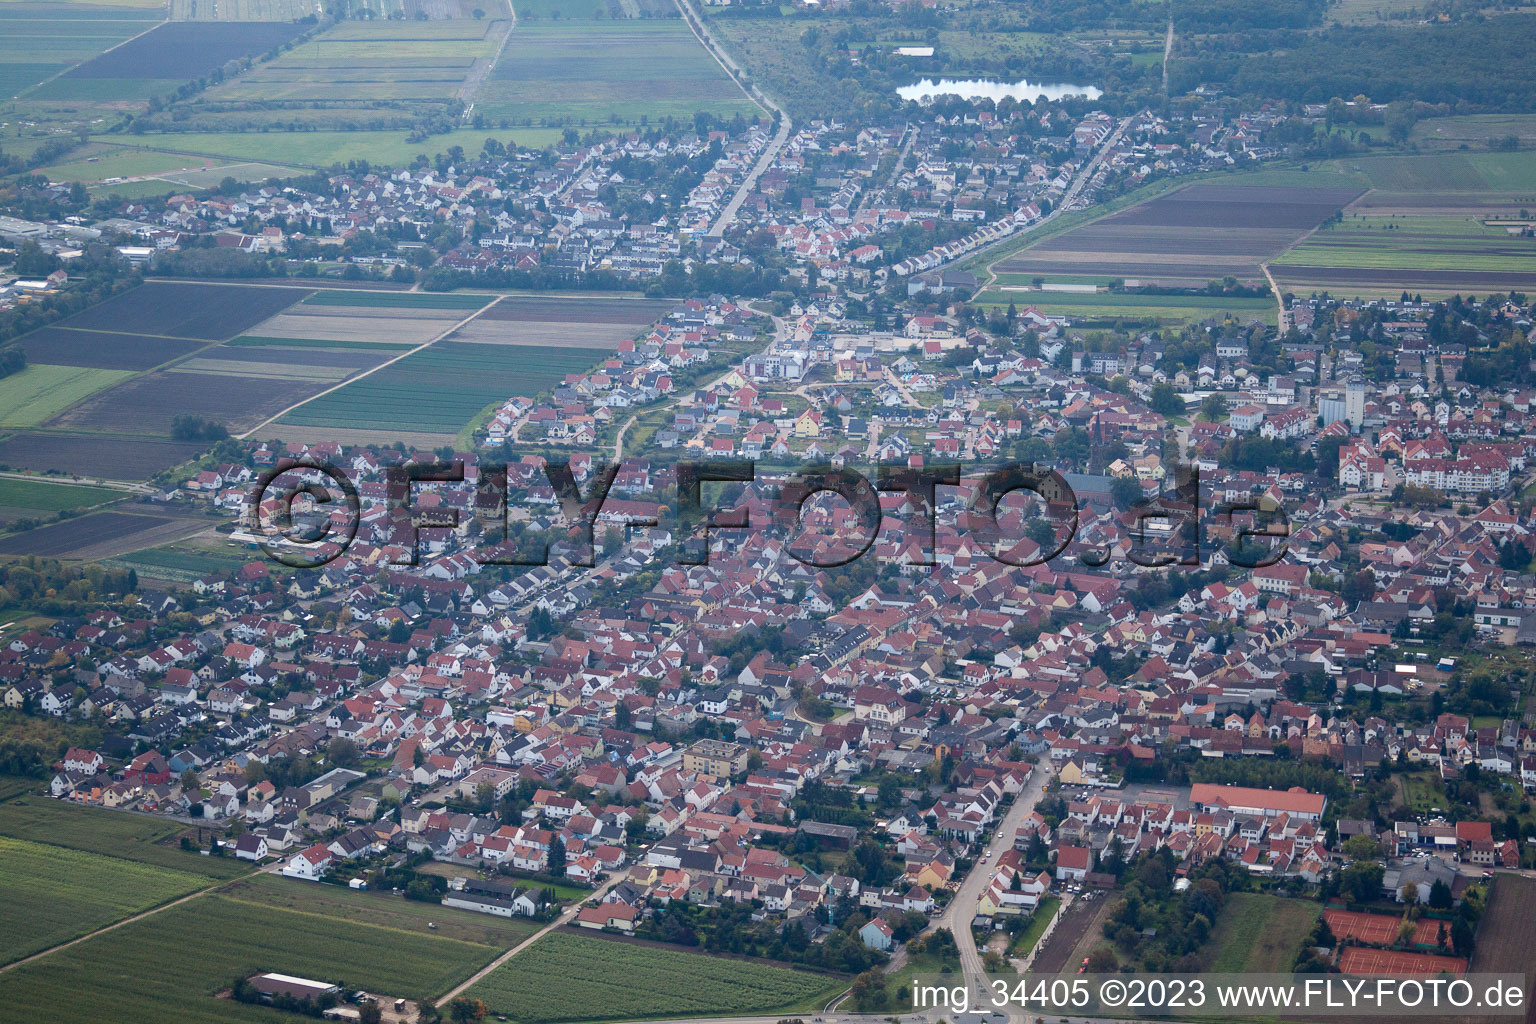 Lambsheim in the state Rhineland-Palatinate, Germany from above